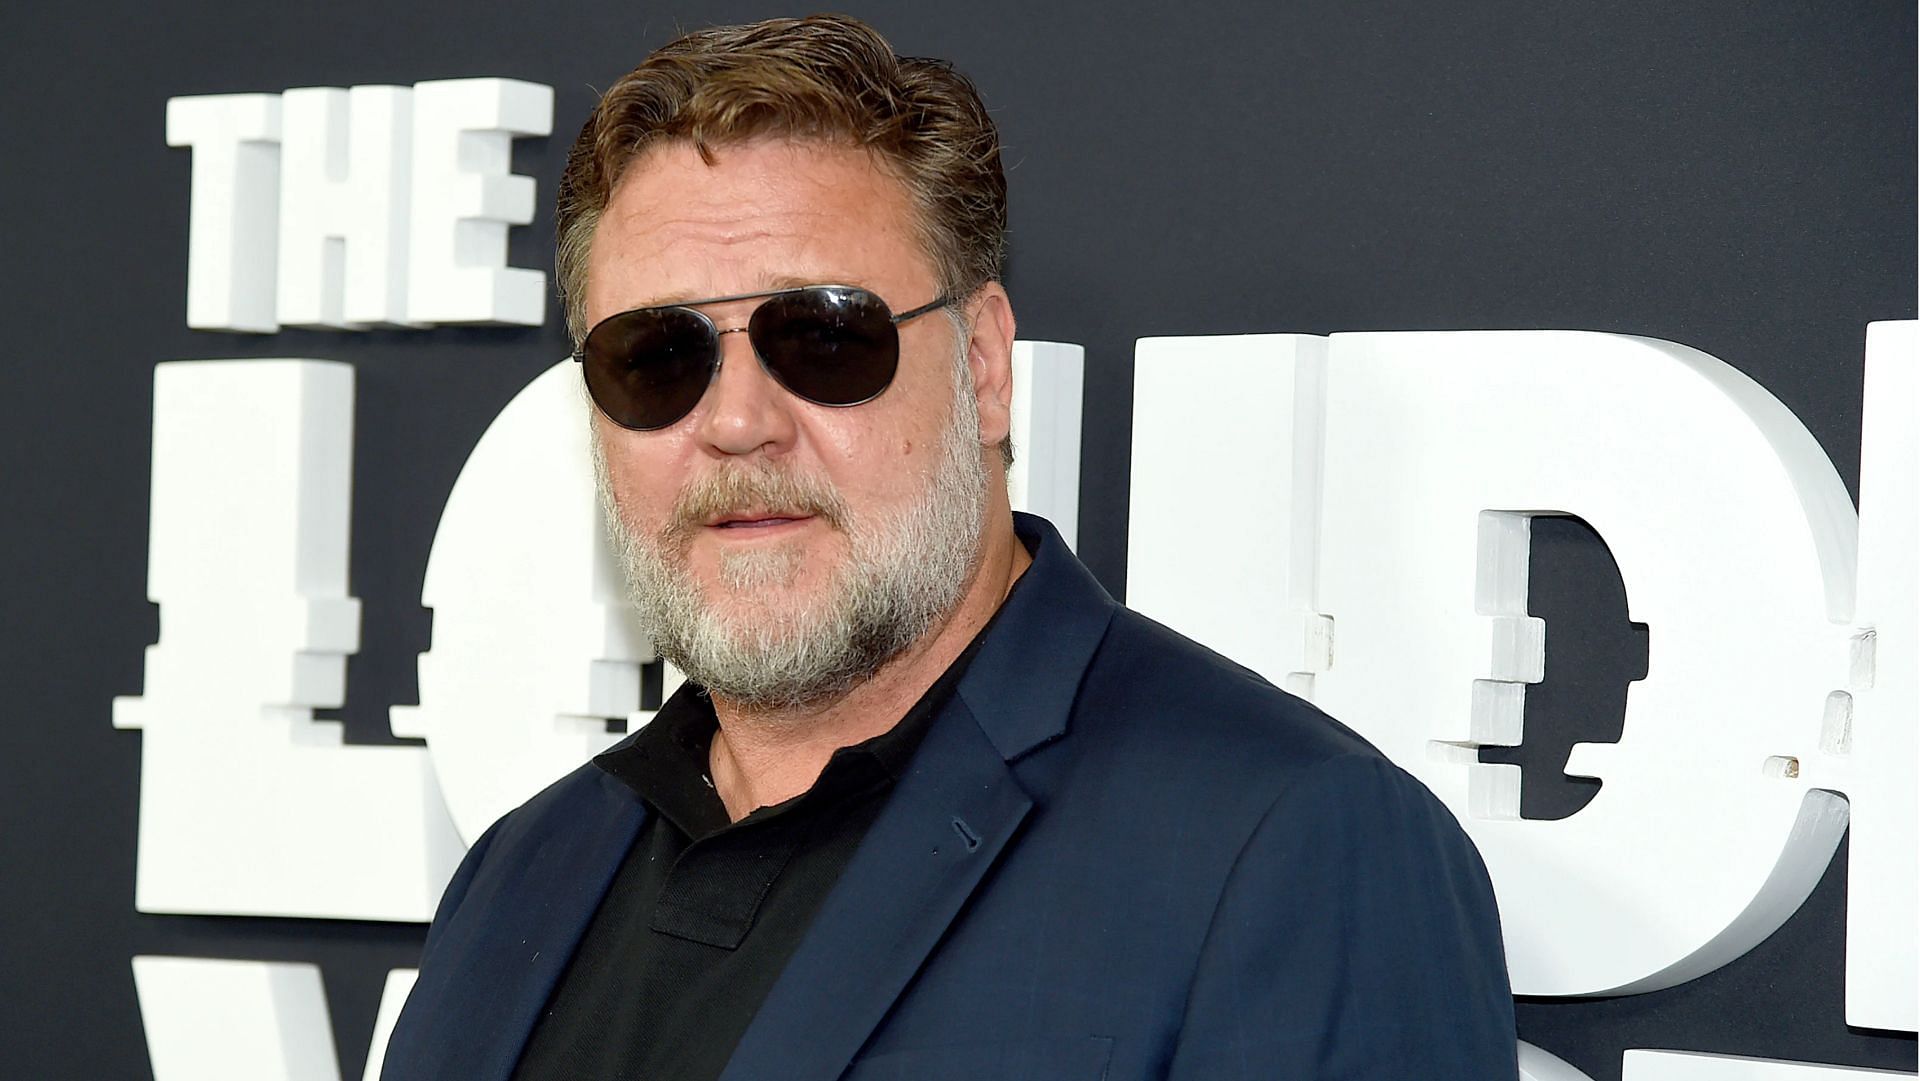 Russell Crowe shares two sons with ex-wife Danielle Spencer, Charles Spencer Crowe, and Tennyson Spencer Crowe. (Image via Jamie McCarthy/Getty)